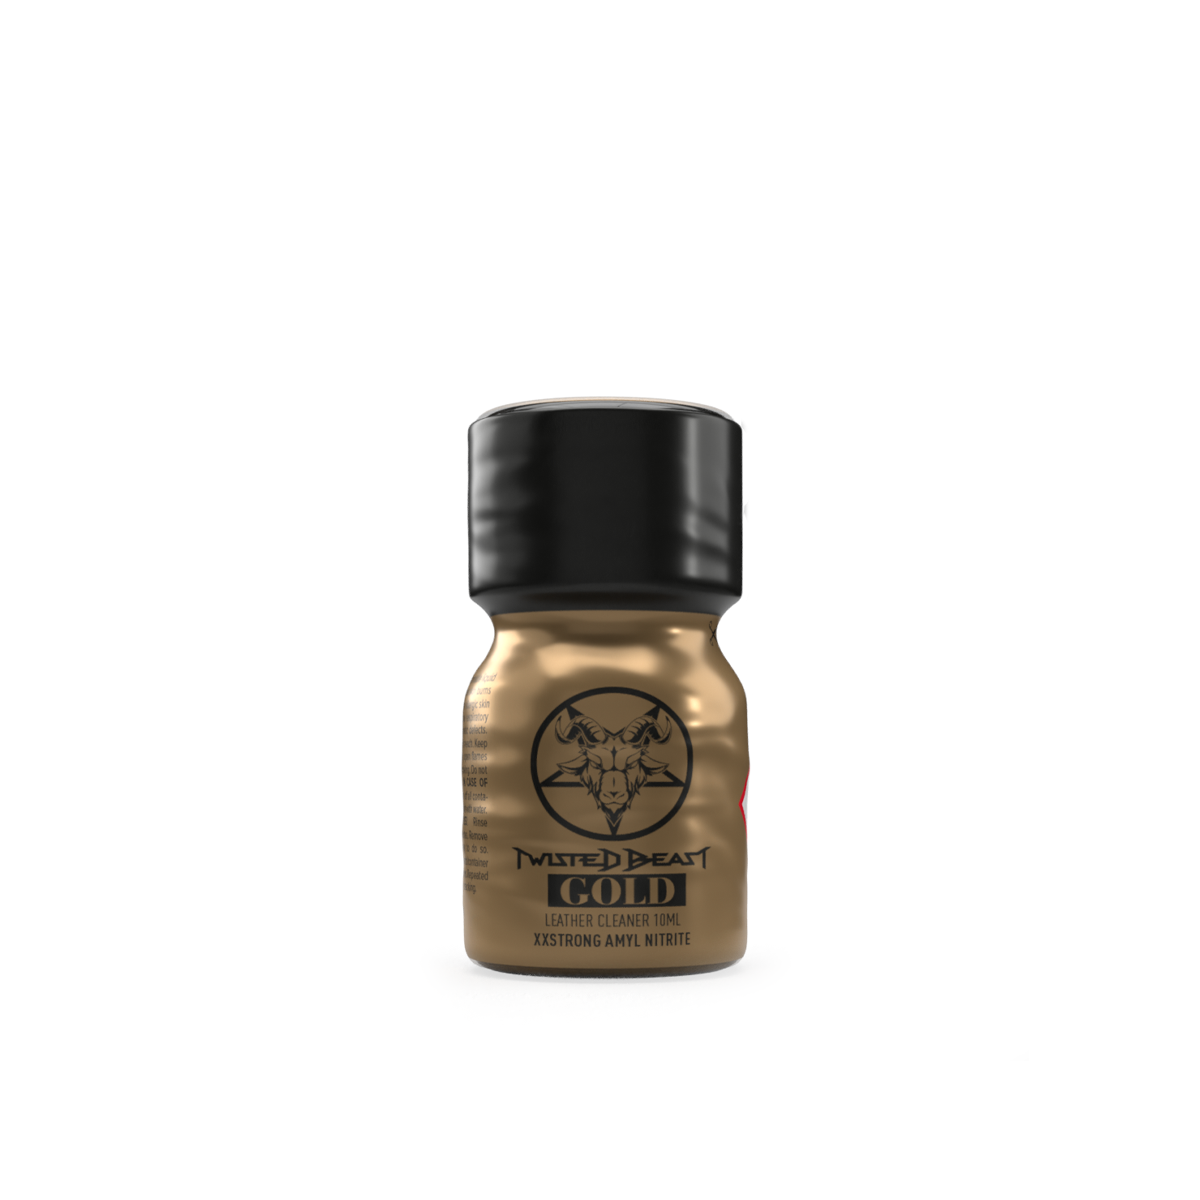 A product photo of Twisted Beast Gold 10ml.